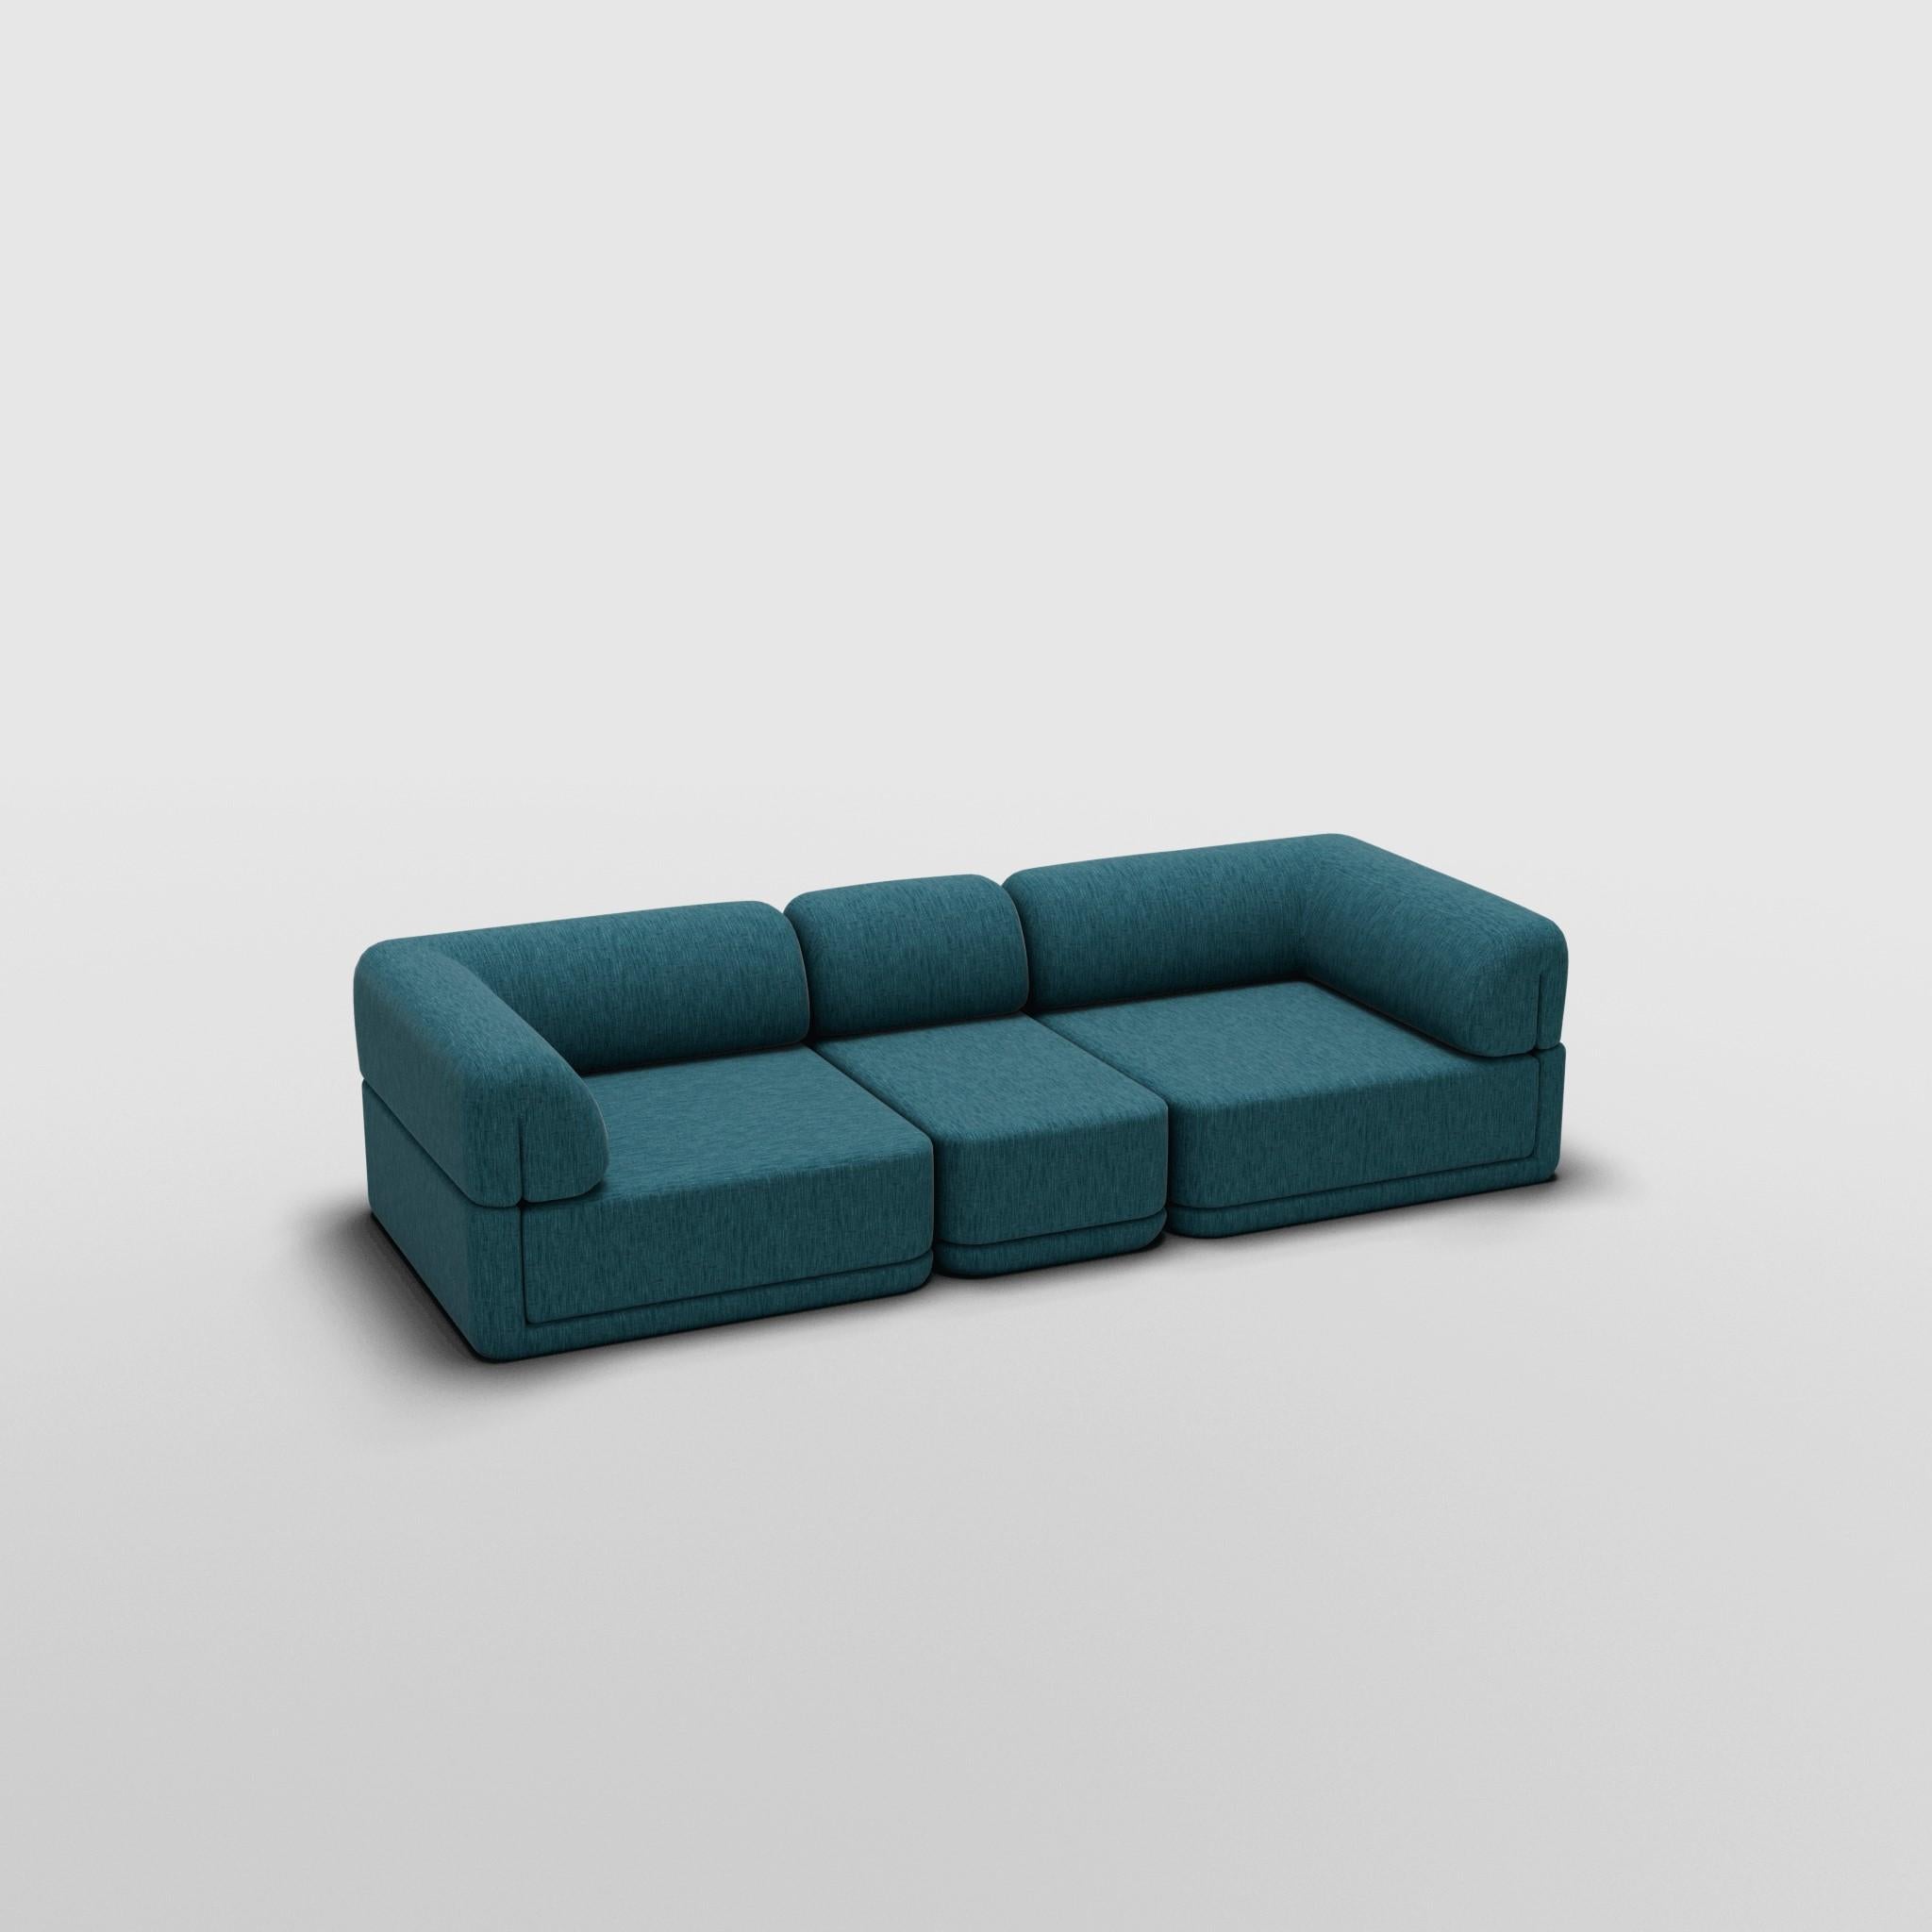 Sofa Slim Set - Inspired by 70s Italian Luxury Furniture

Discover The Cube Sofa, where art meets adaptability. Its sculptural design and customizable comfort create endless possibilities for your living space. Make a statement, elevate your